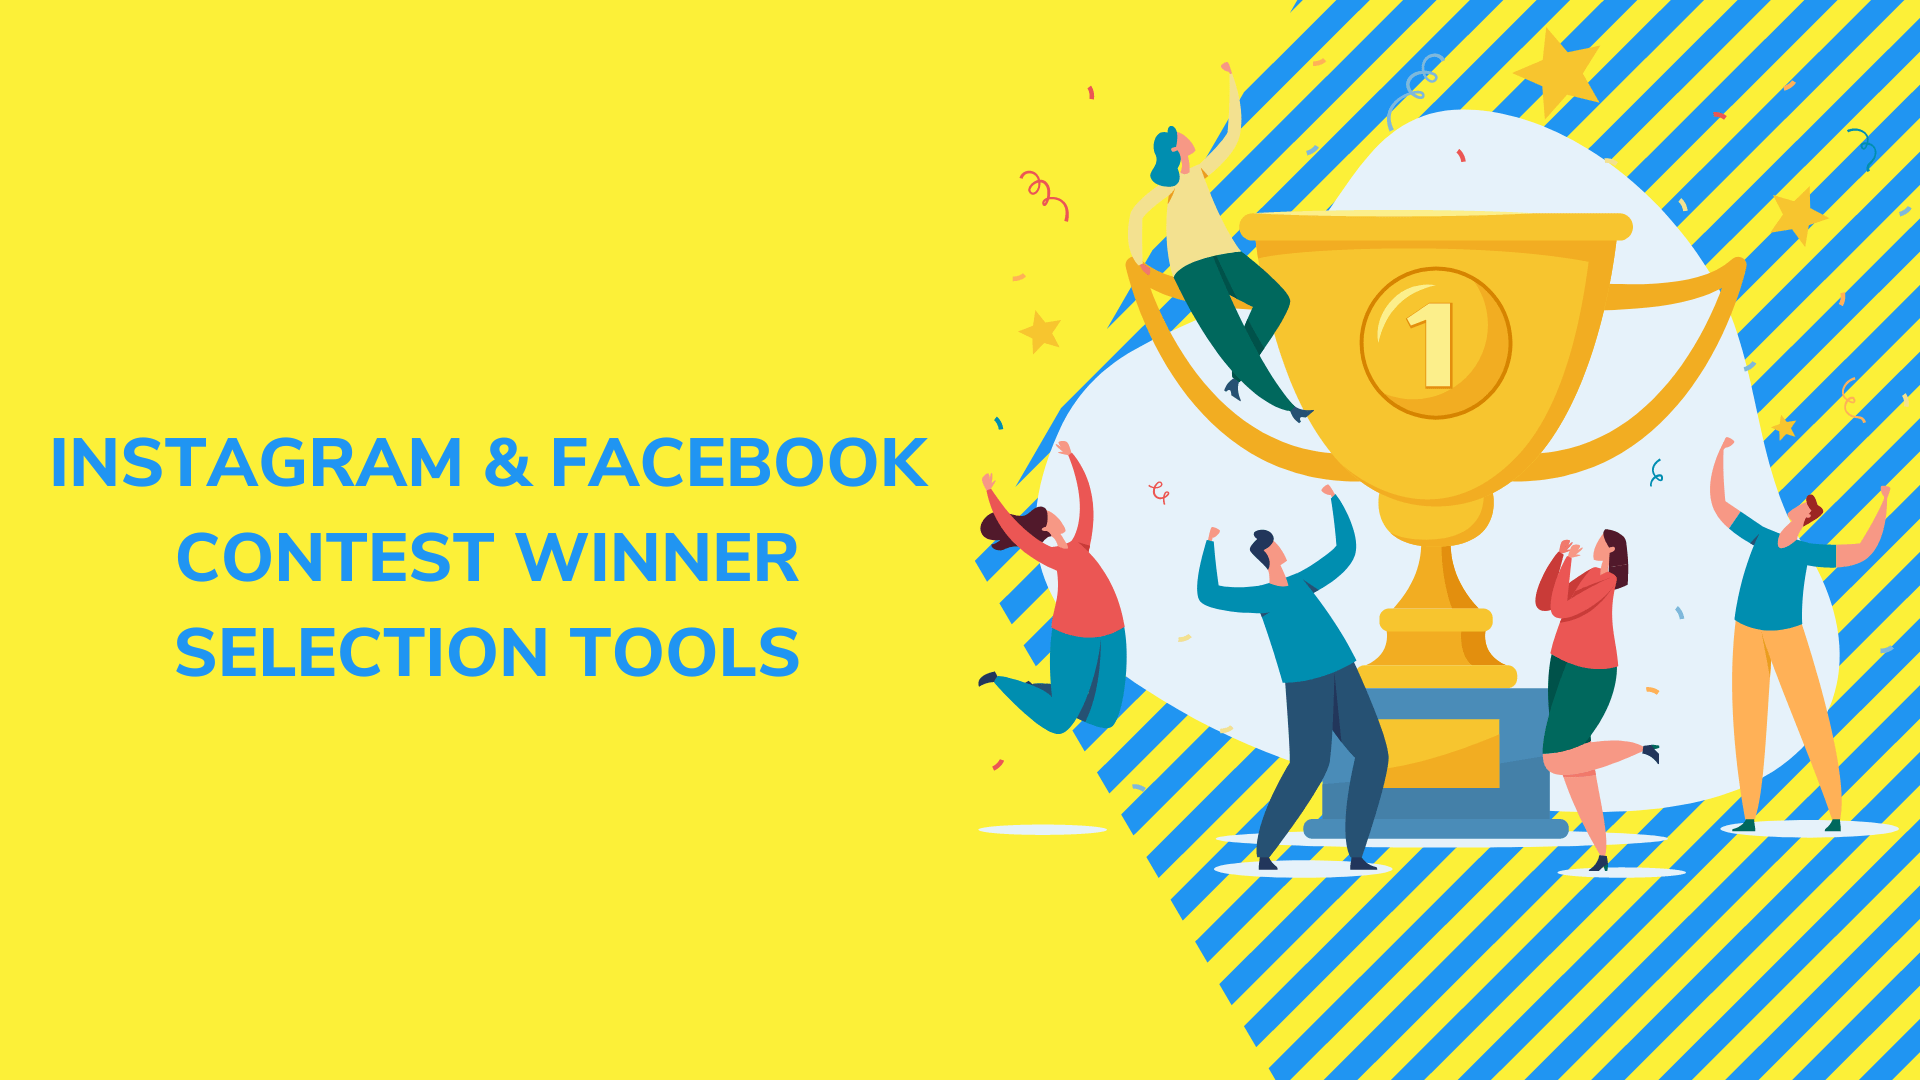 IG and FB Contest Winner Tools